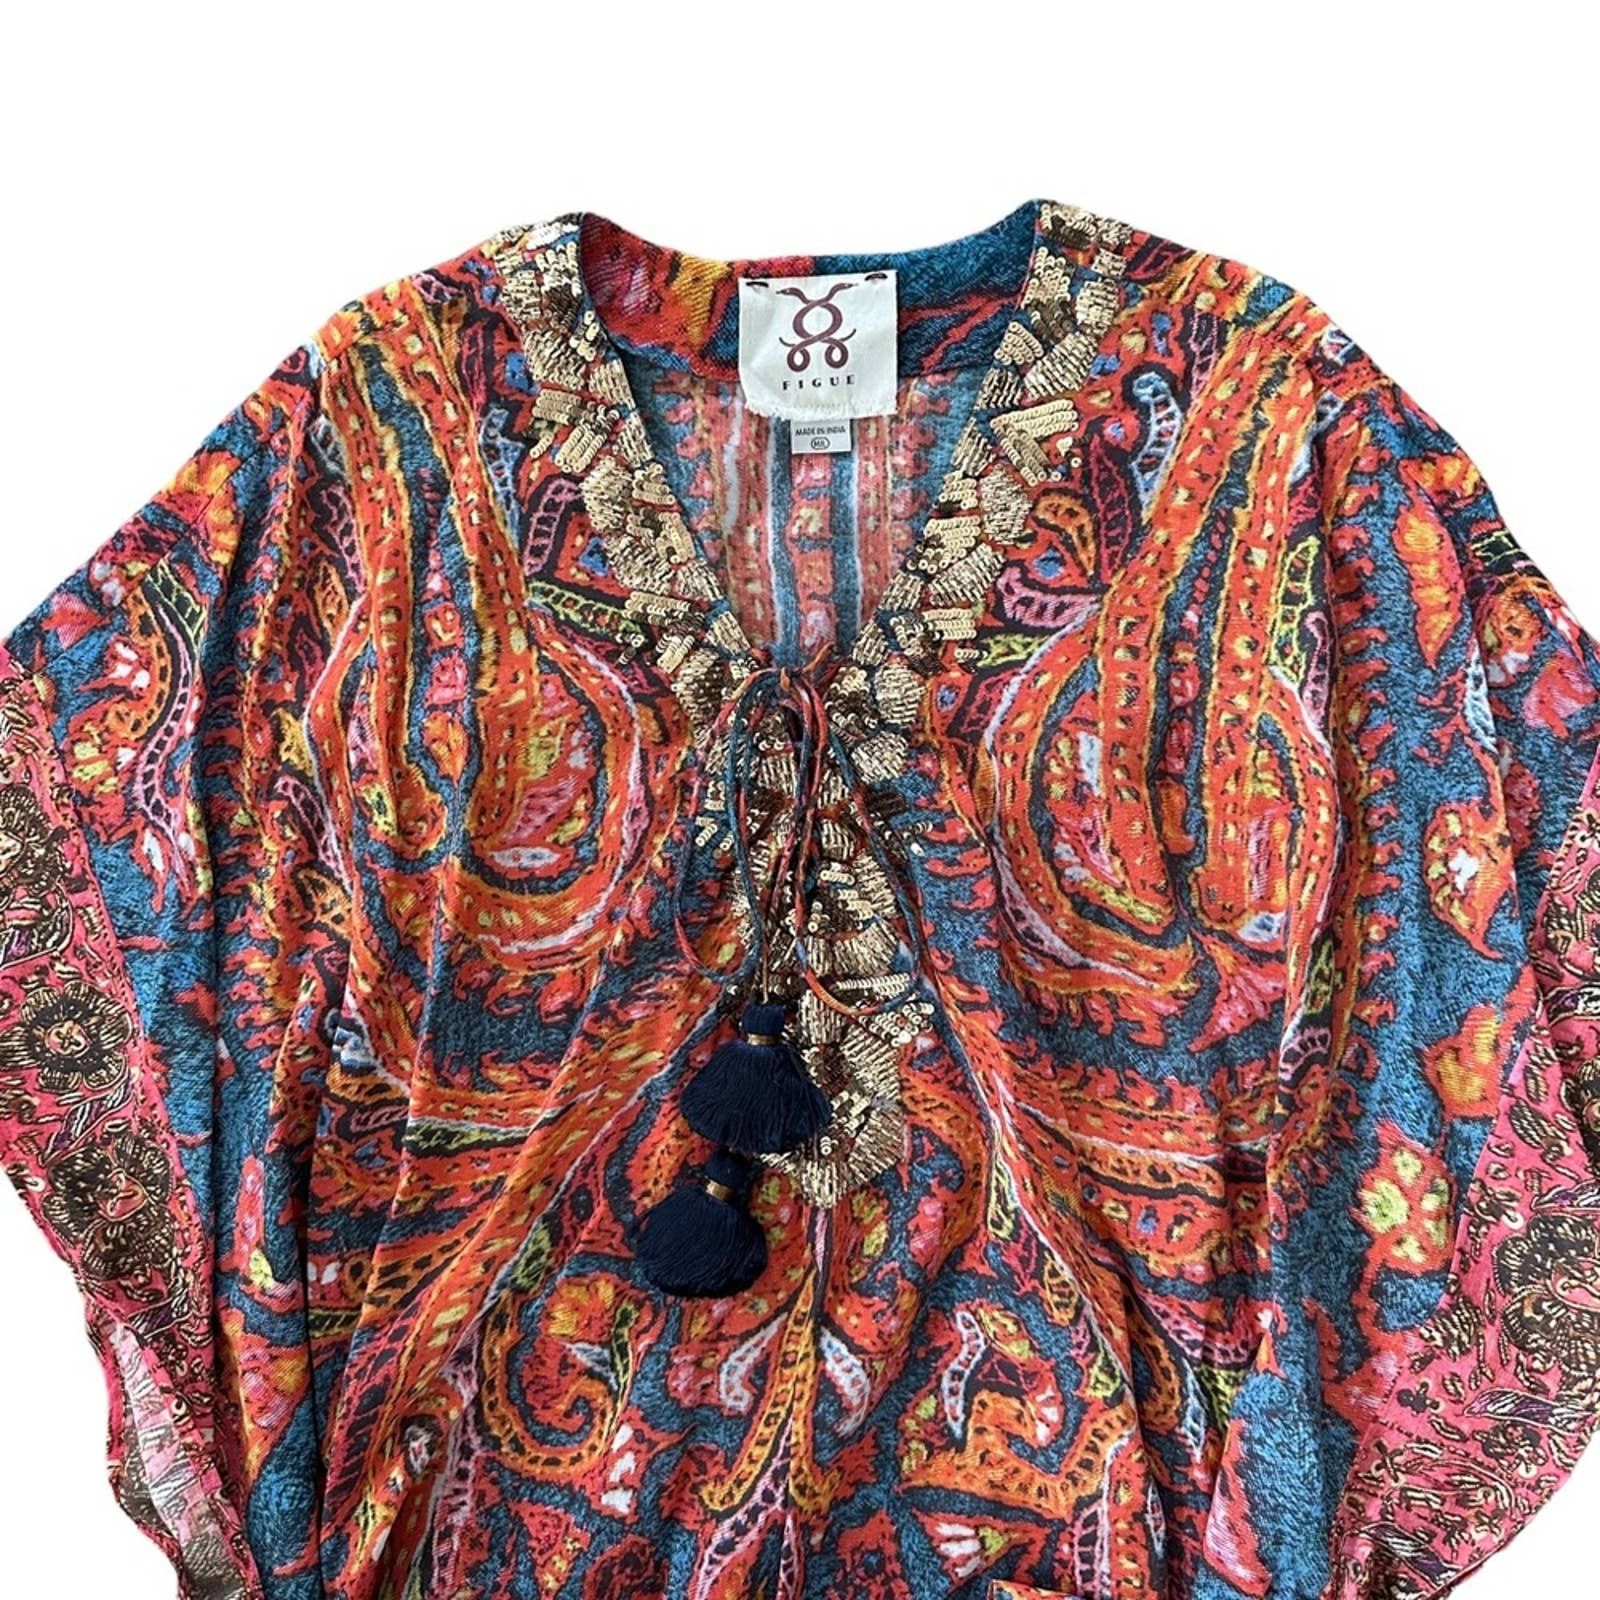 Figue Figue Brianna Embellished Caftan Cover-Up Medium Large Size M / US 6-8 / IT 42-44 - 5 Thumbnail